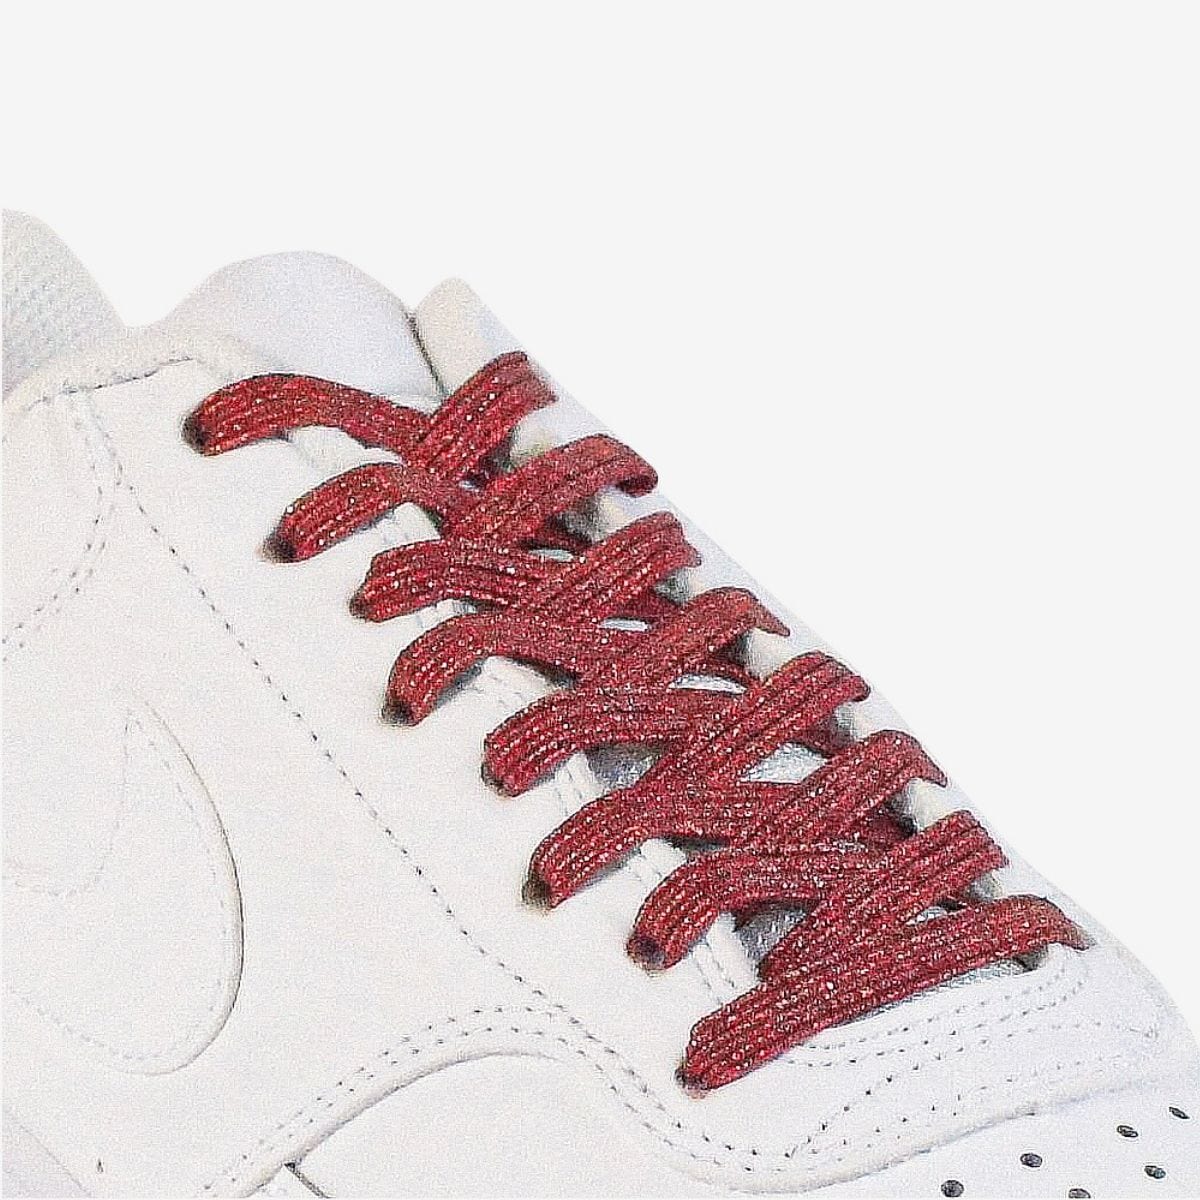 different-ways-to-lace-shoes-with-red-elastic-shoelaces-on-white-kicks